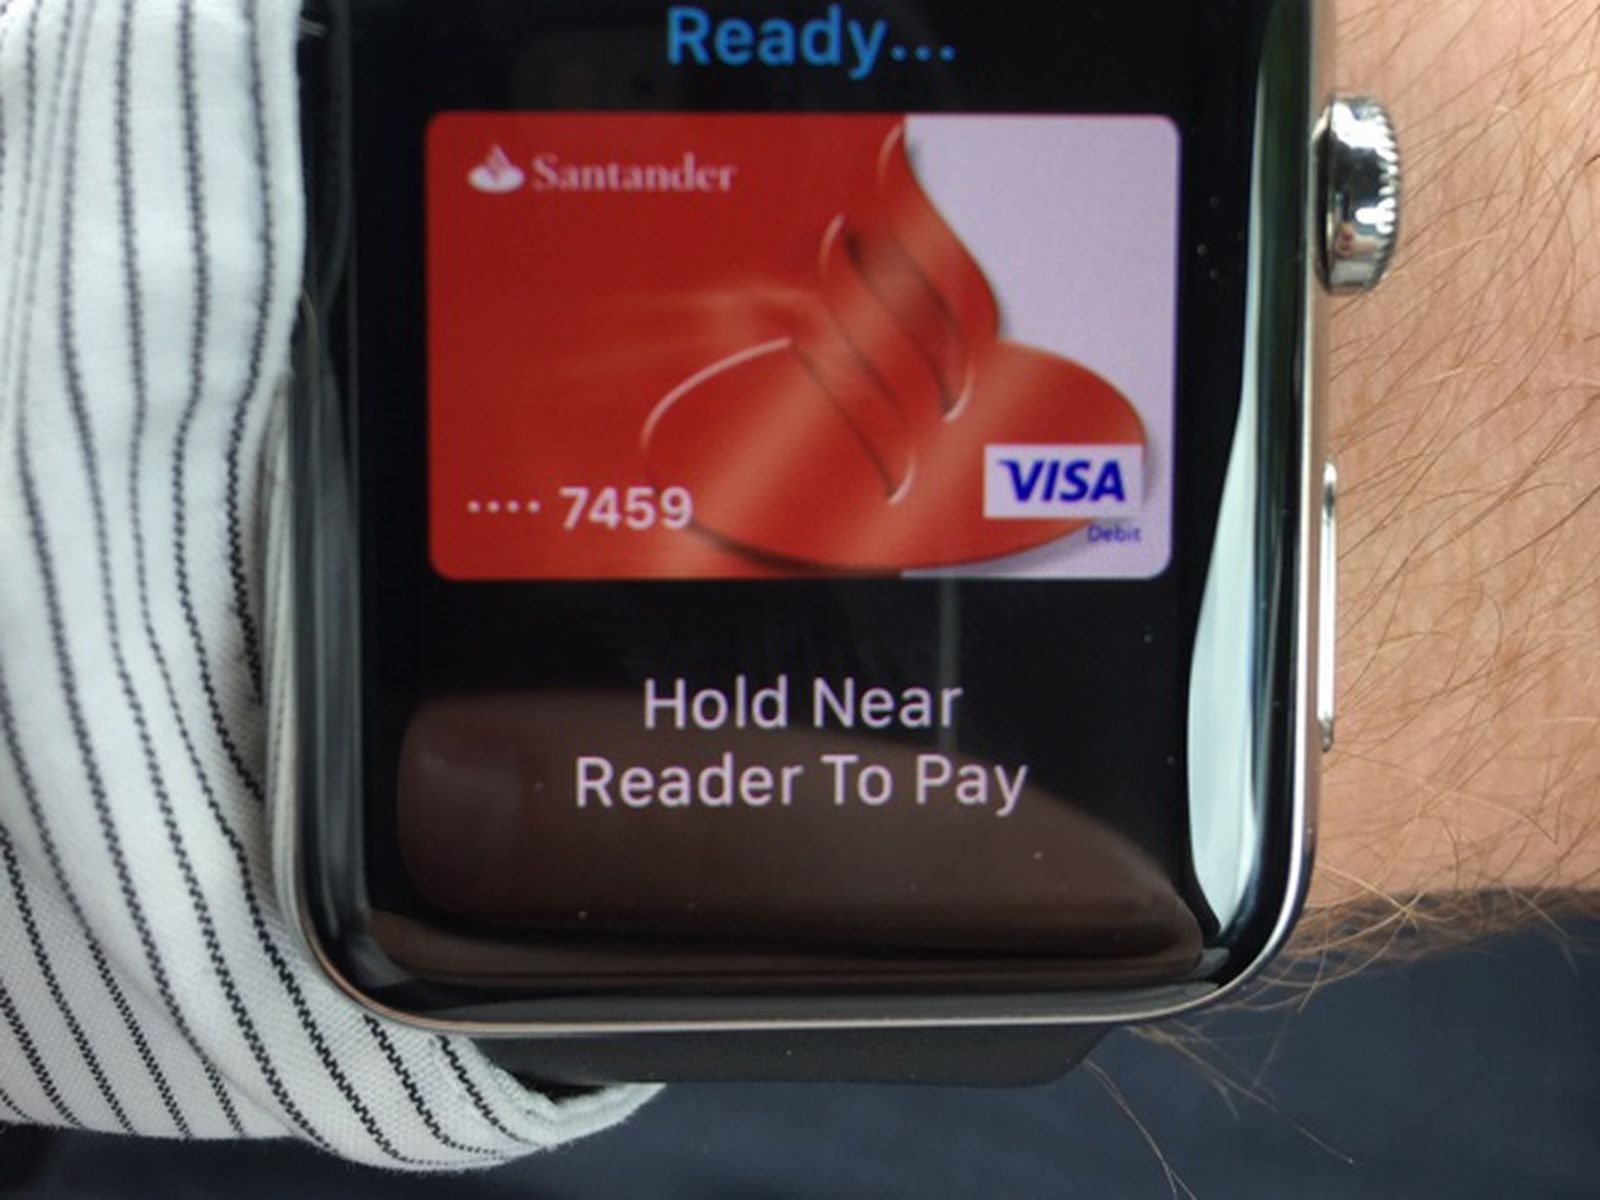 Banks In The U K Gearing Up For Apple Pay Launch As Santander Allows Customers To Register Cards Macrumors